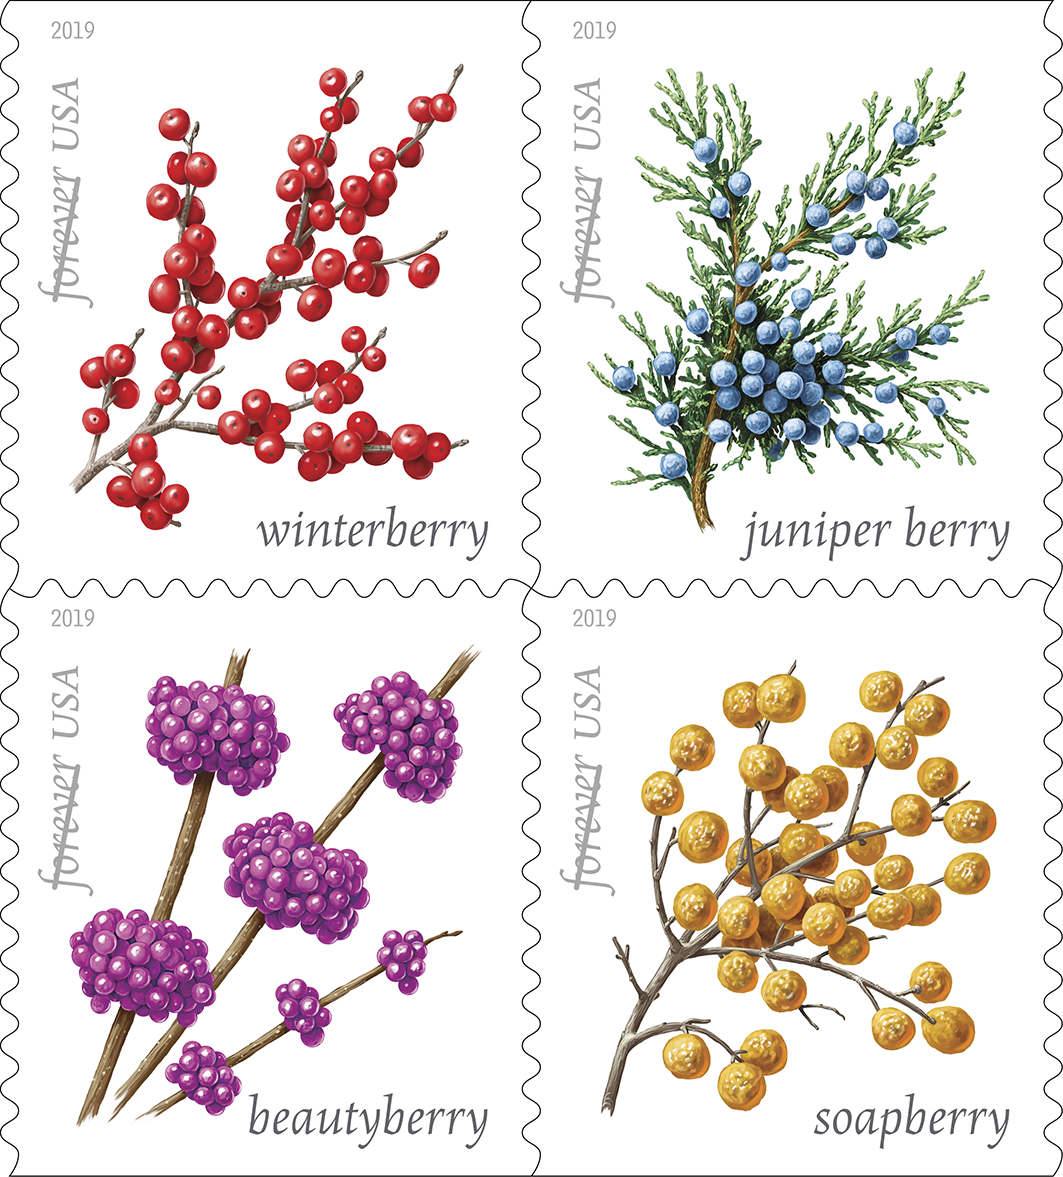 New Forever Stamps Feature Winter Berries